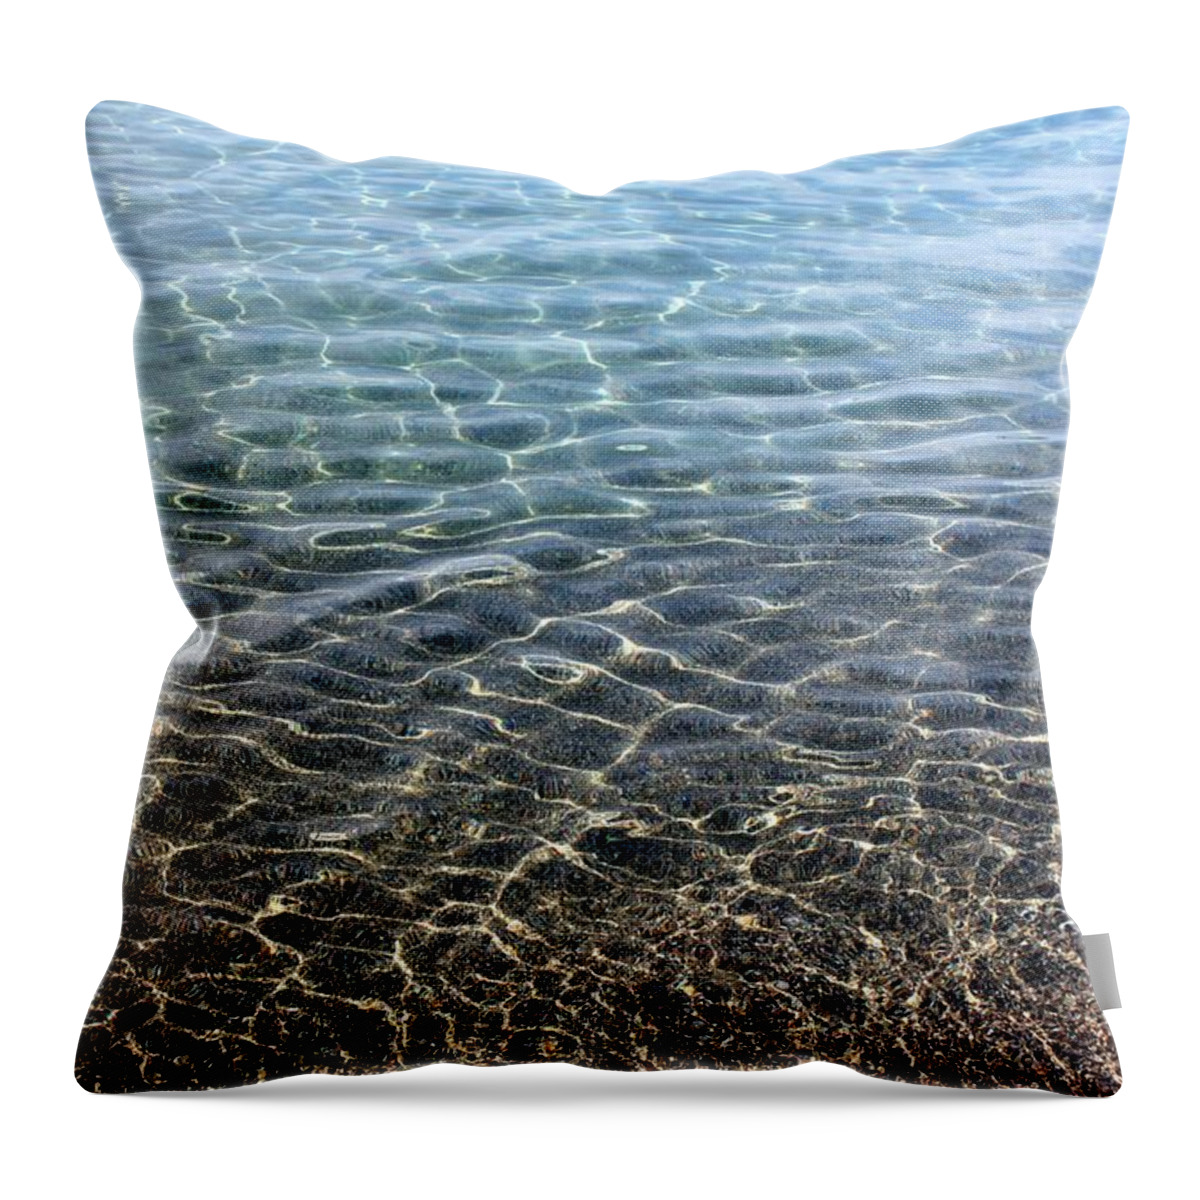 Terrace Bay Throw Pillow featuring the photograph Terrace Bay by Pat Purdy